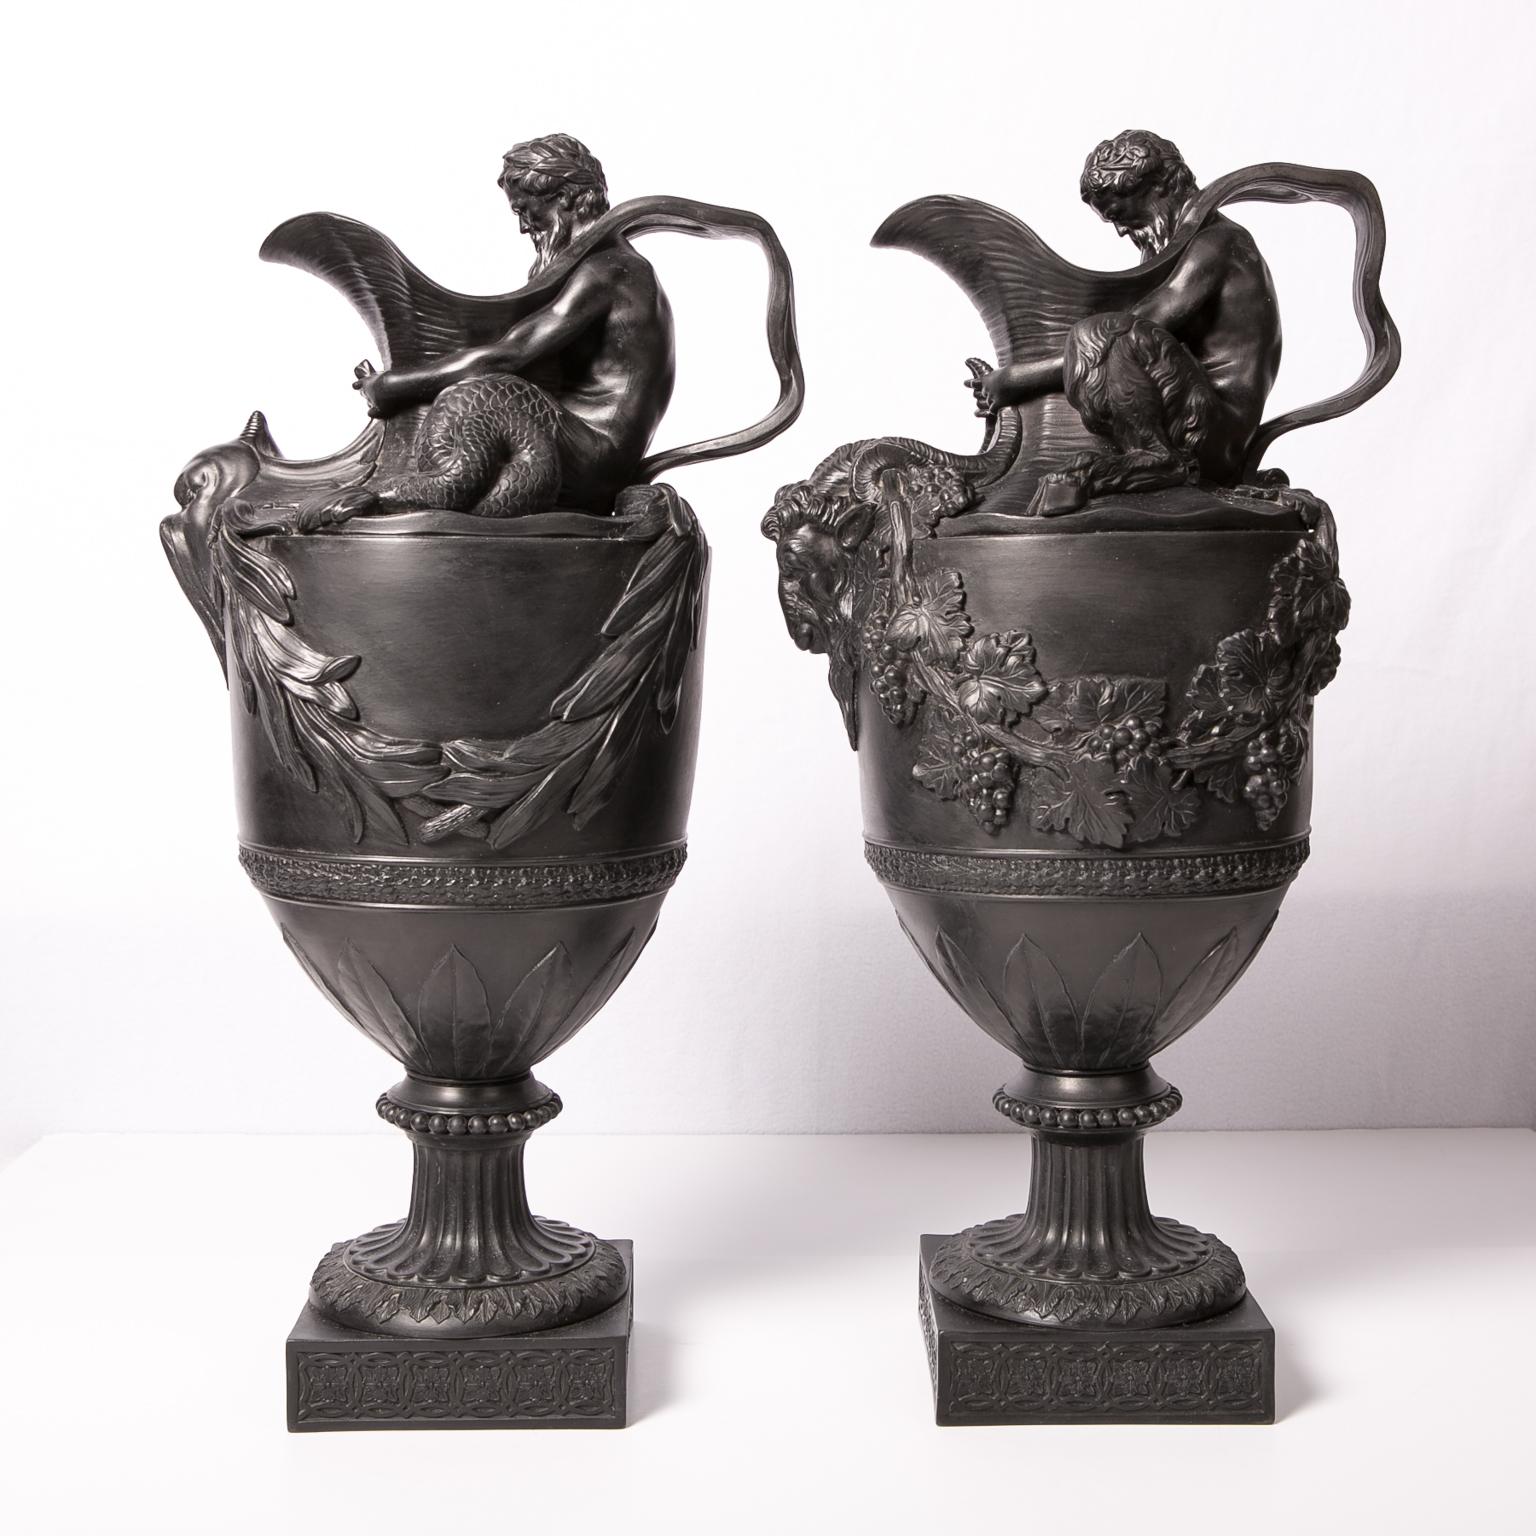 WHY WE LOVE IT: Classicalism at it's finest
We are pleased to offer this extraordinary pair of antique Wedgwood black basalt wine and water ewers named: 